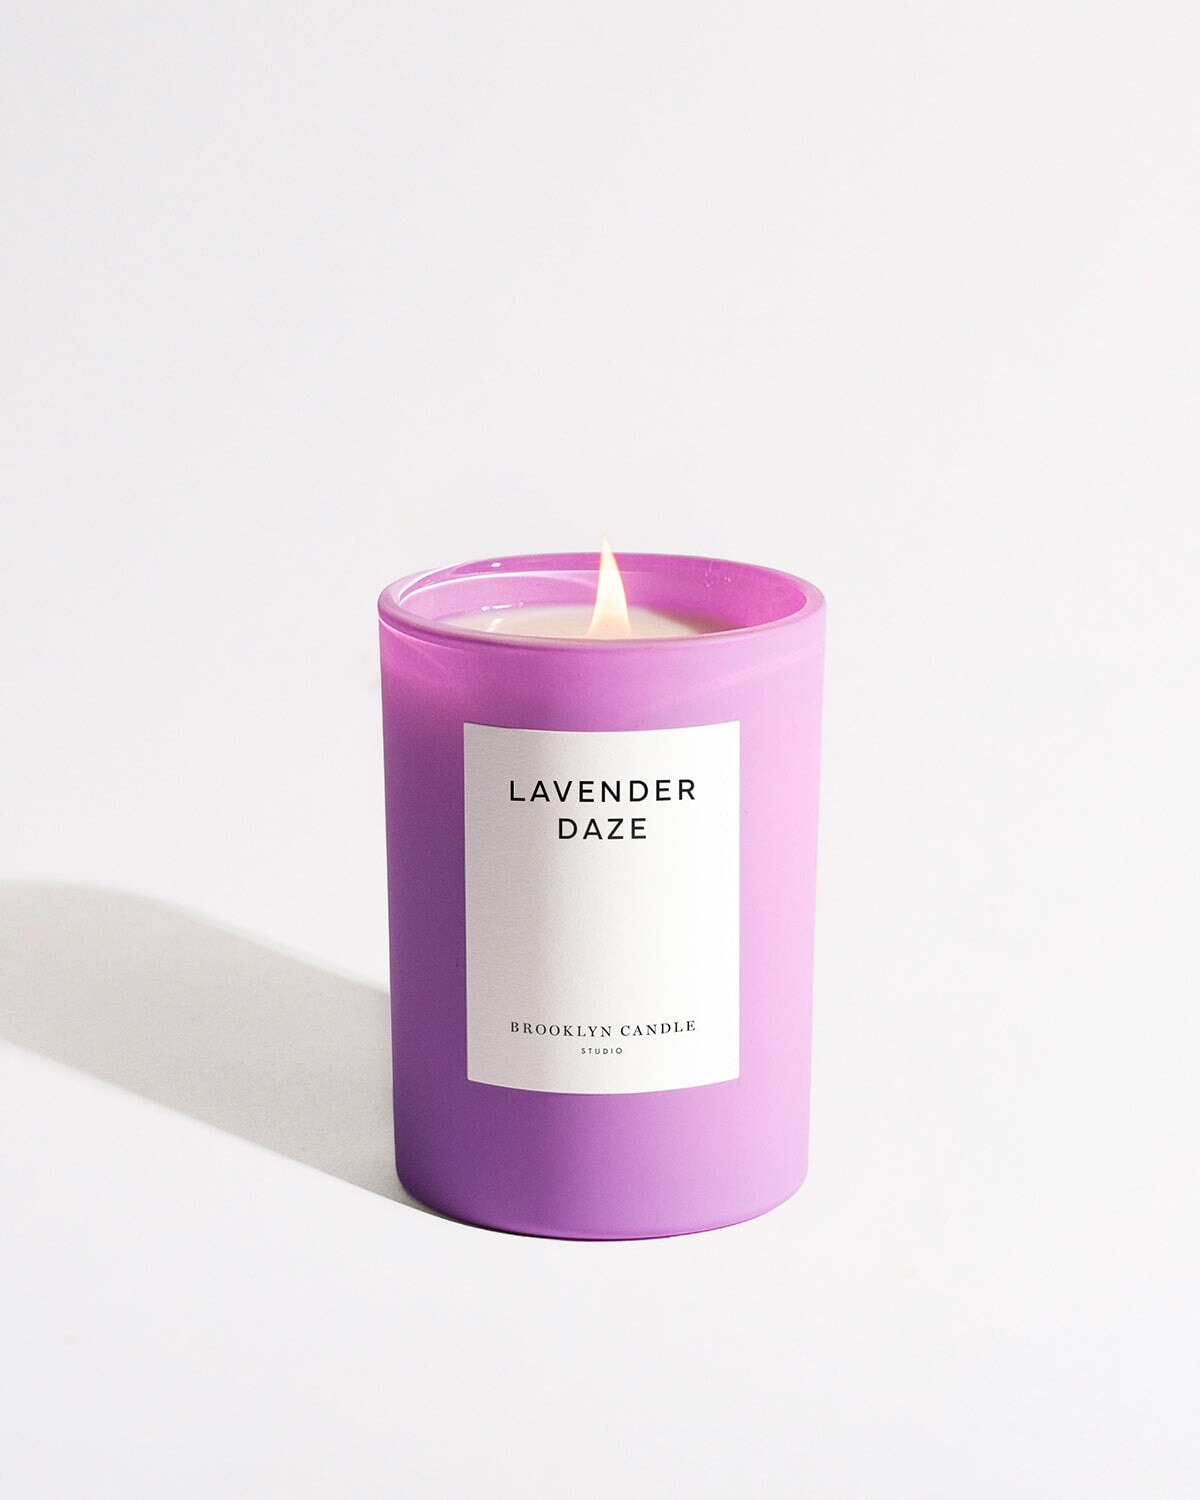 Lavender Daze Spring Edition Candle Lilac Haze Collection Brooklyn Candle Studio 